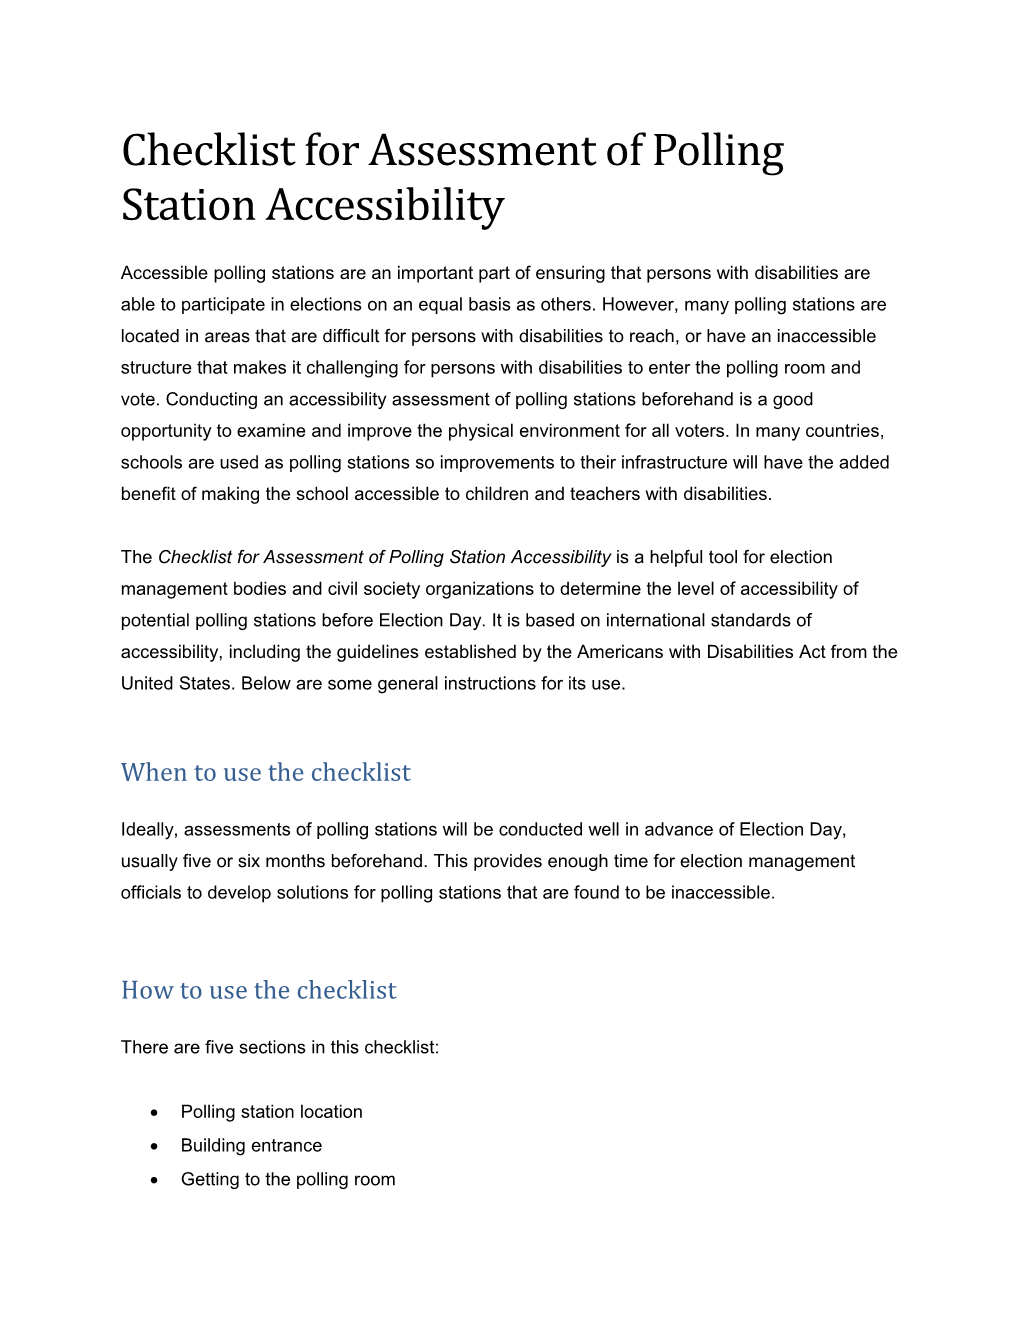 Checklist for Assessment of Polling Station Accessibility